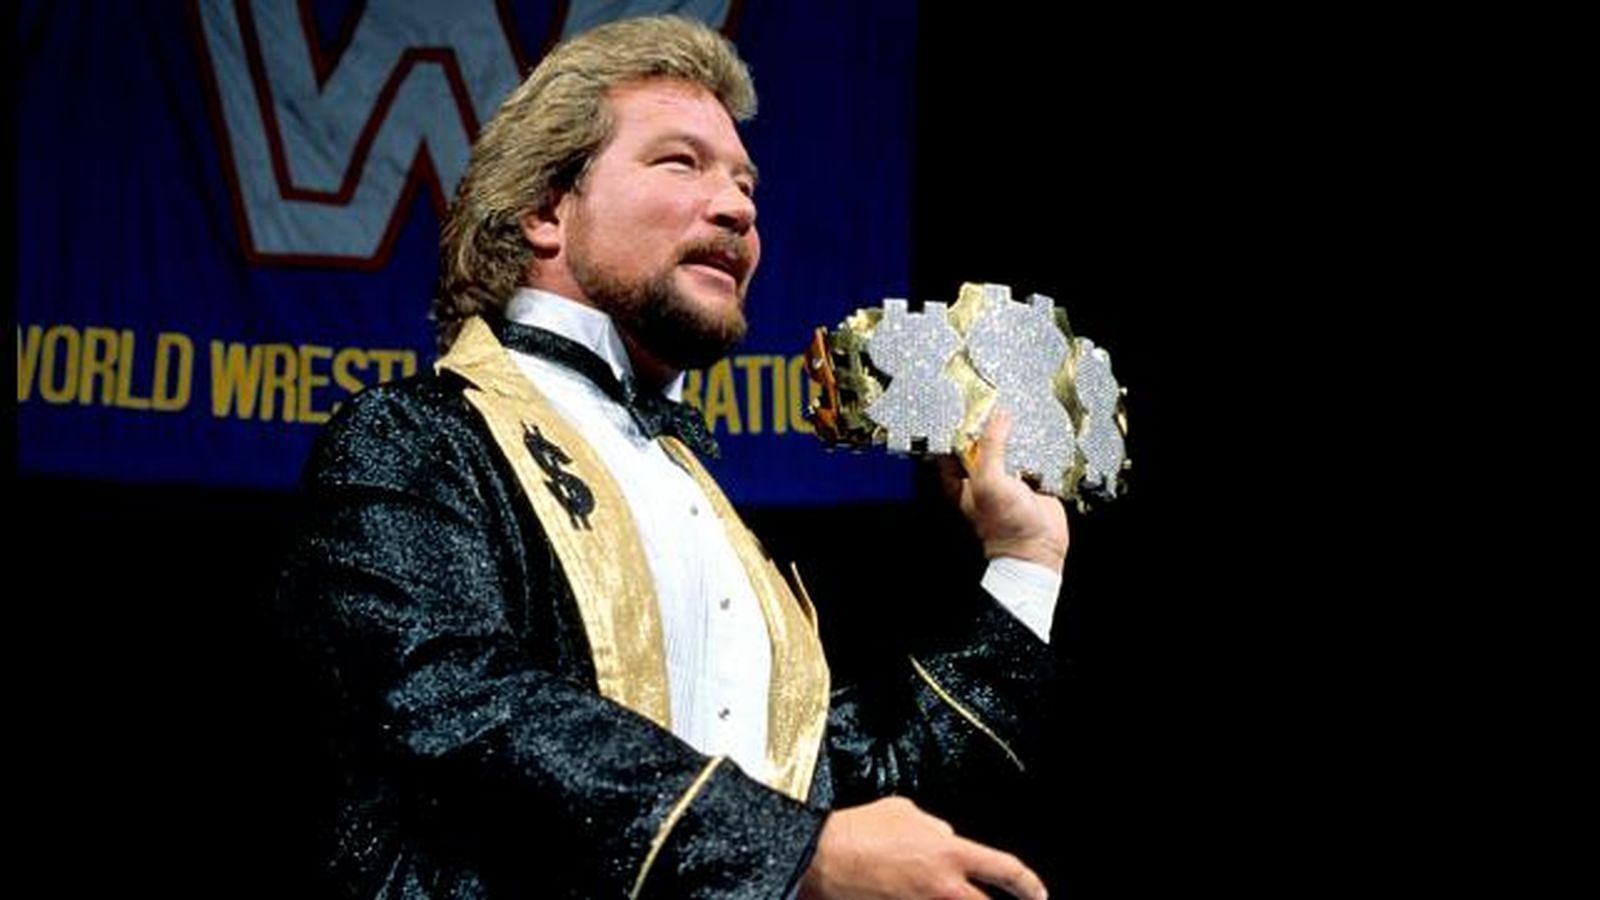 Ted DiBiase with the title he made famous.